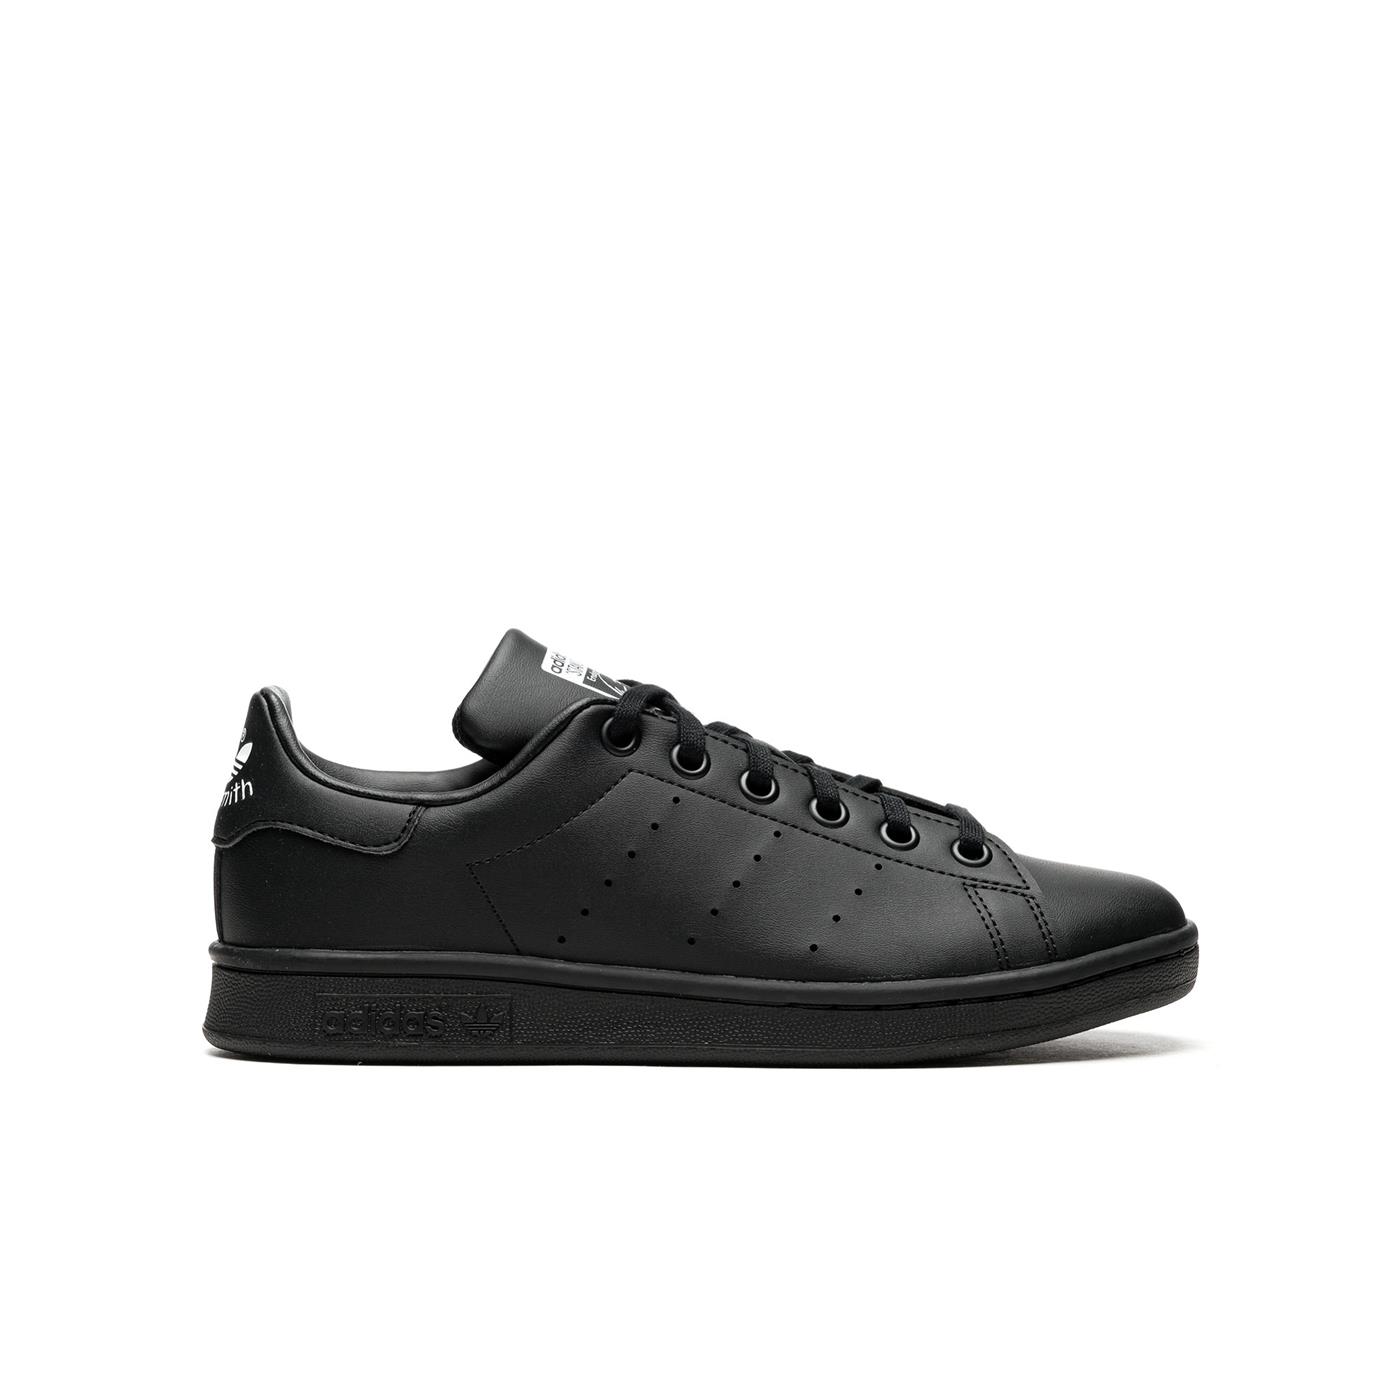 critic Visiting grandparents Make a name ChronosconsultingShops | Sneakers ADIDAS Stan Smith J Black for Junior |  adidas sitekey official page login | FX7523